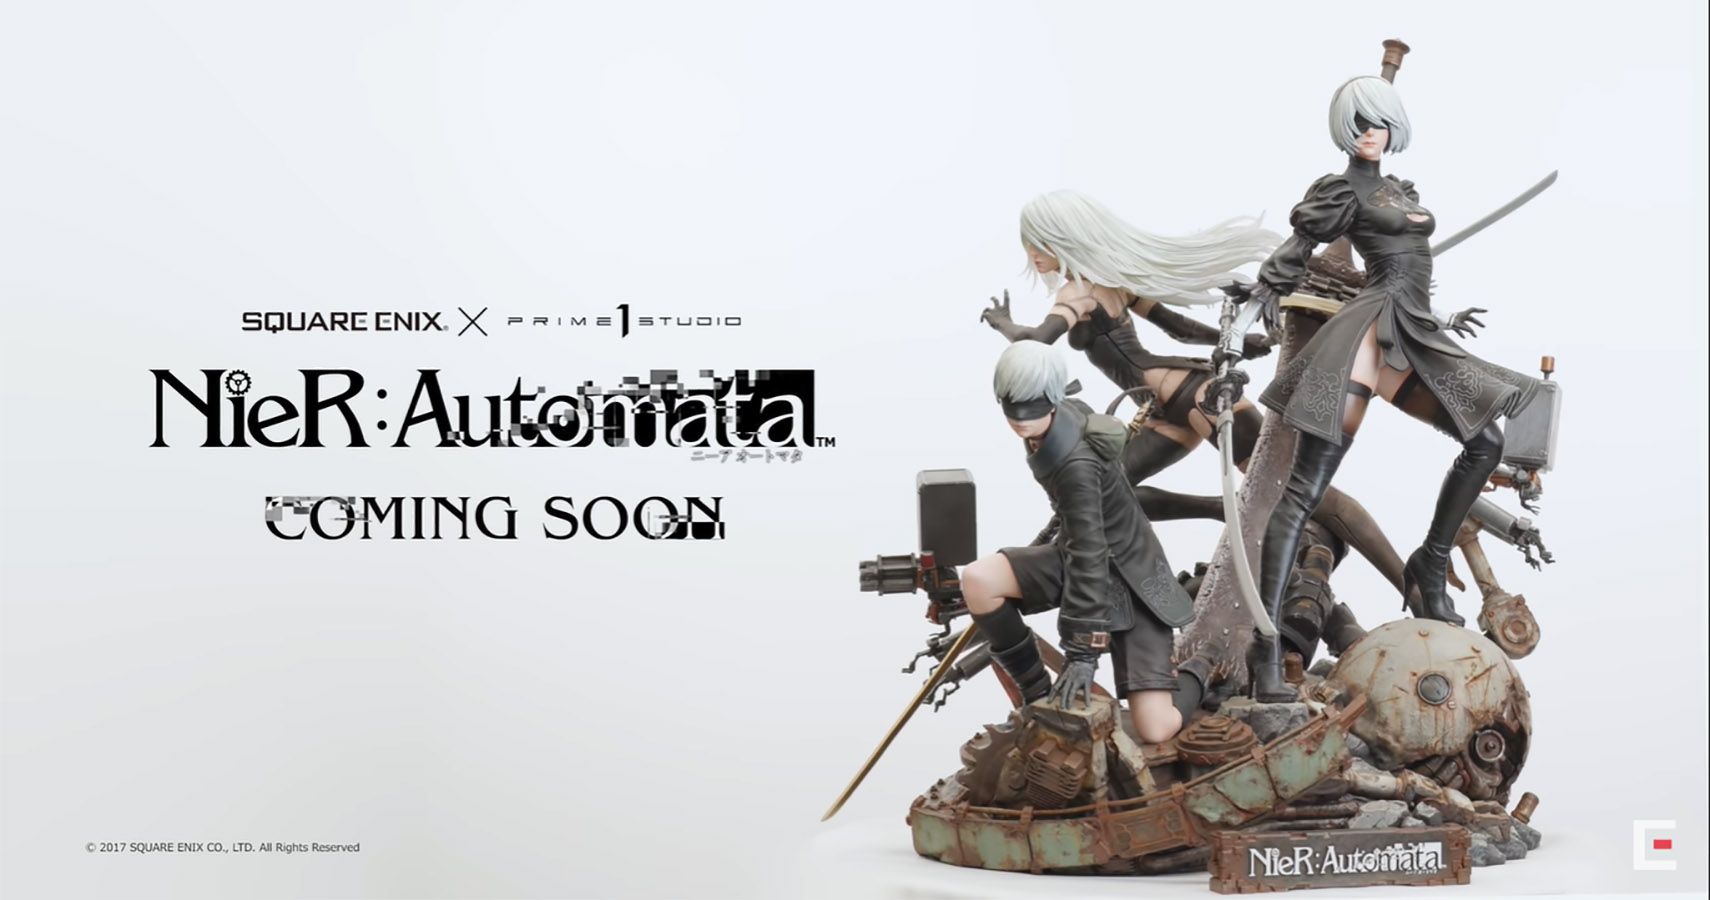 Statue of Nier Automata characters.